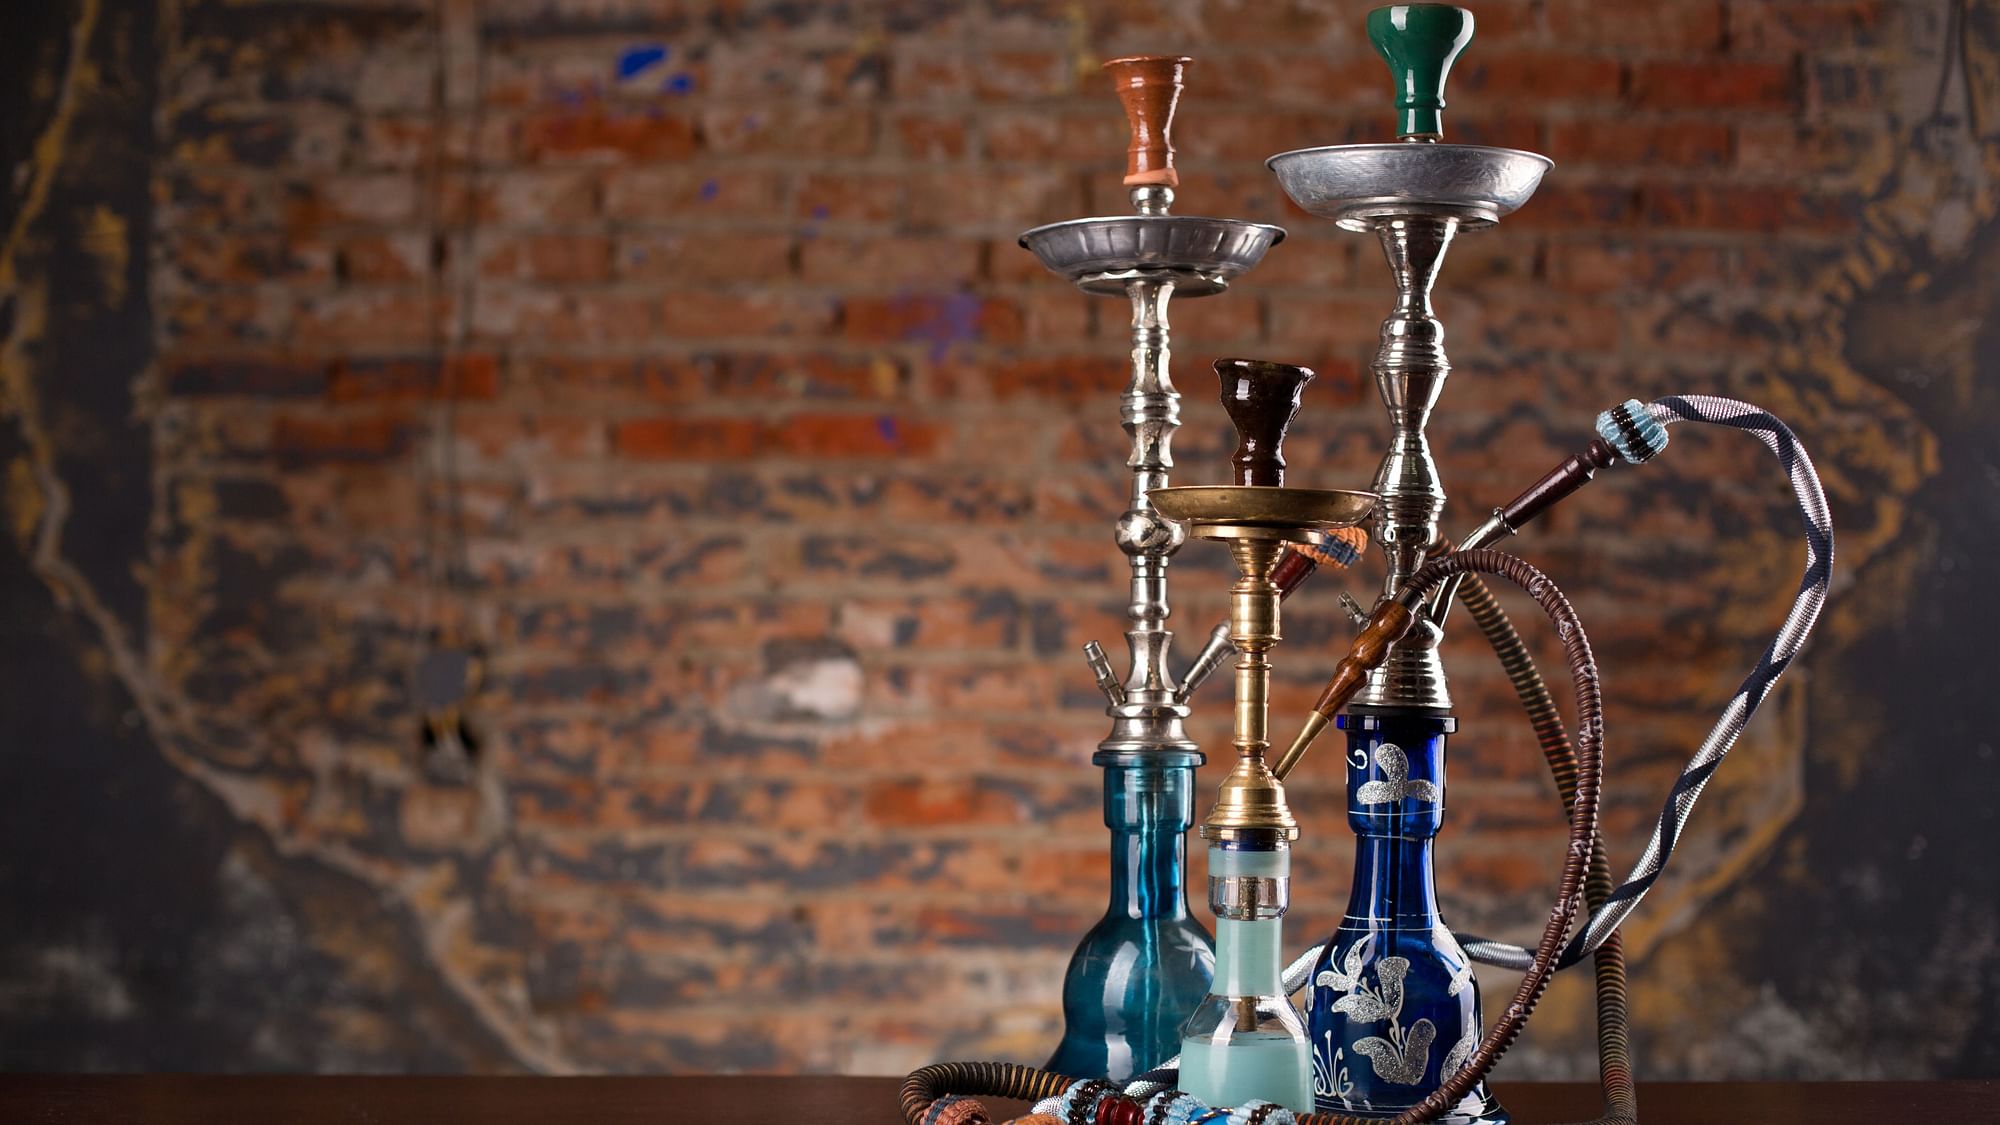 Exposure to the hookah smoke also caused other abnormalities related to the way the blood flows.